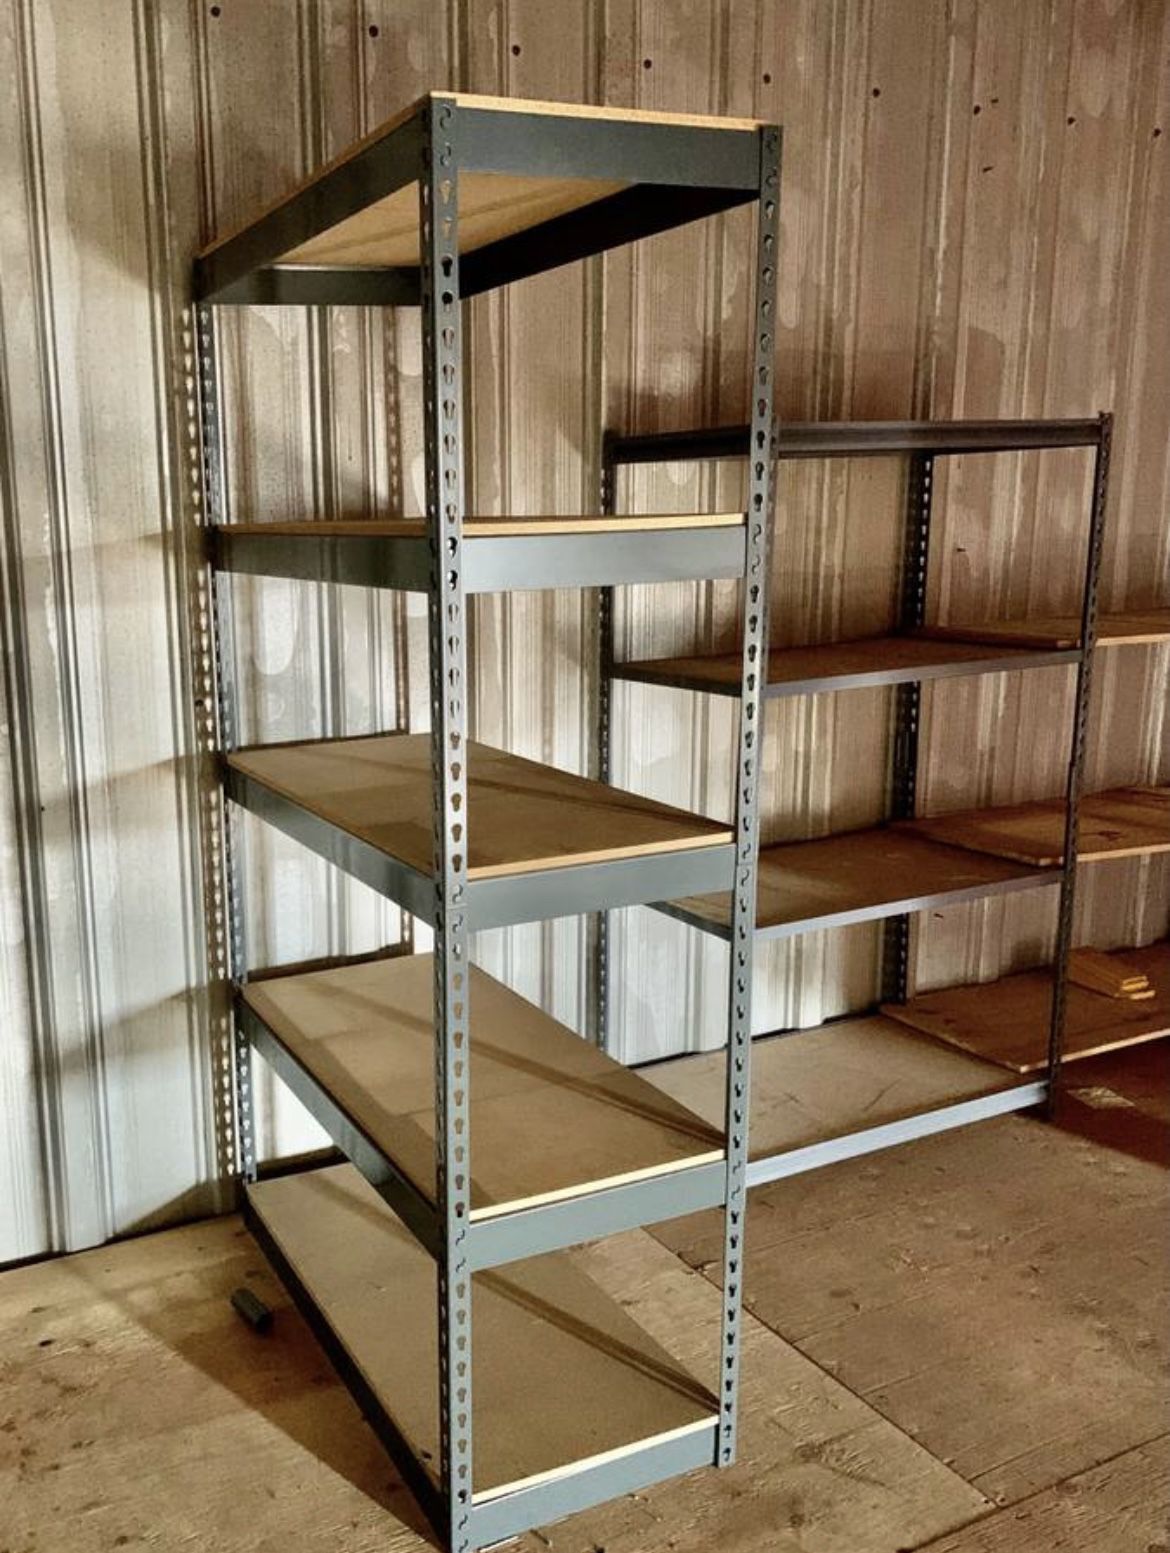 Garage Shelving 48 in W x 18 in D New Industrial Racks Great For Home Office And Commercial Storage Delivery Available